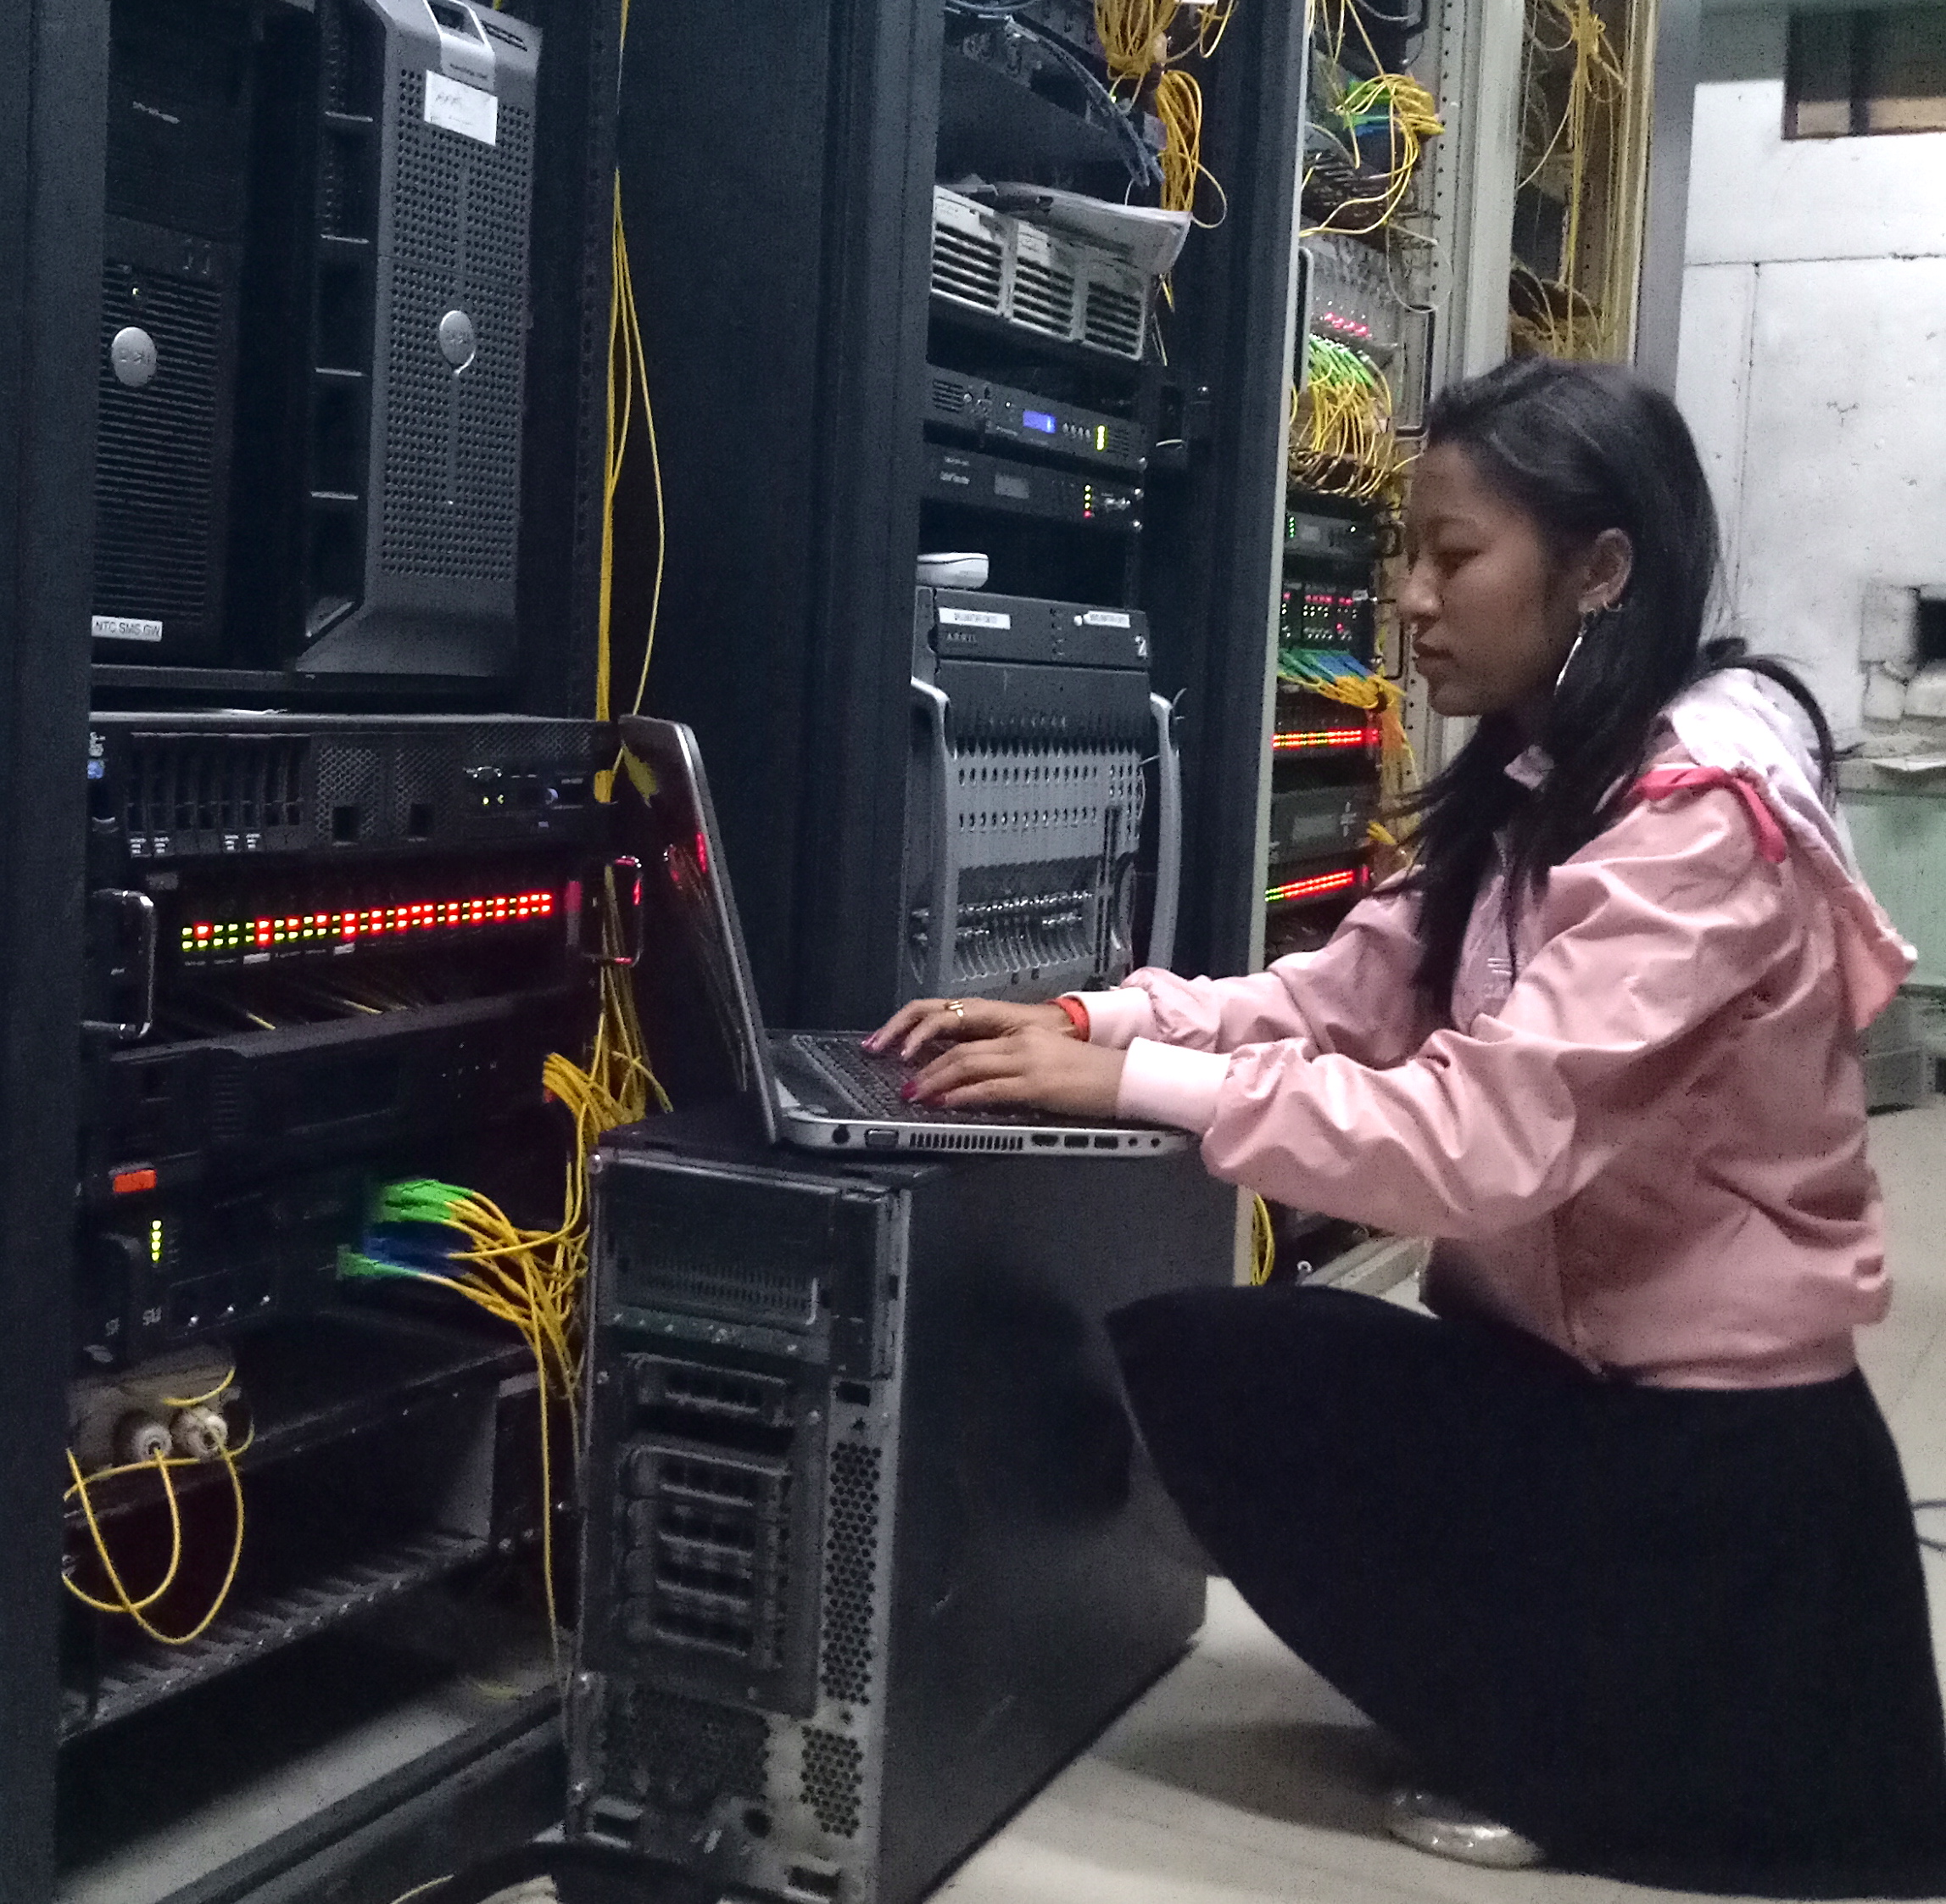 Rashmi Joshi believes there is a bright future for women in ICT in Nepal.